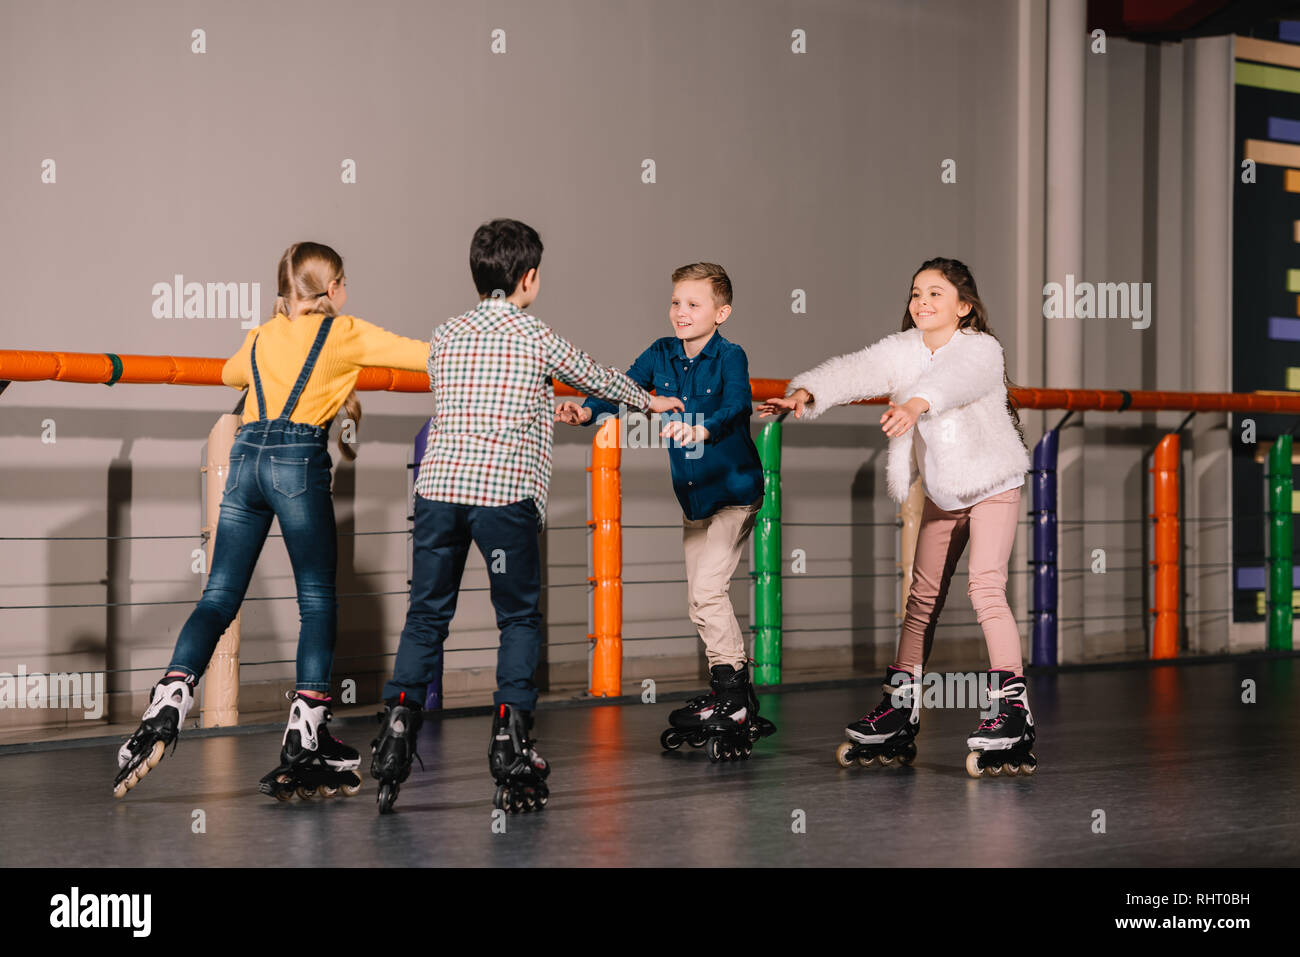 Group of kids fooling around on skater rink Stock Photo